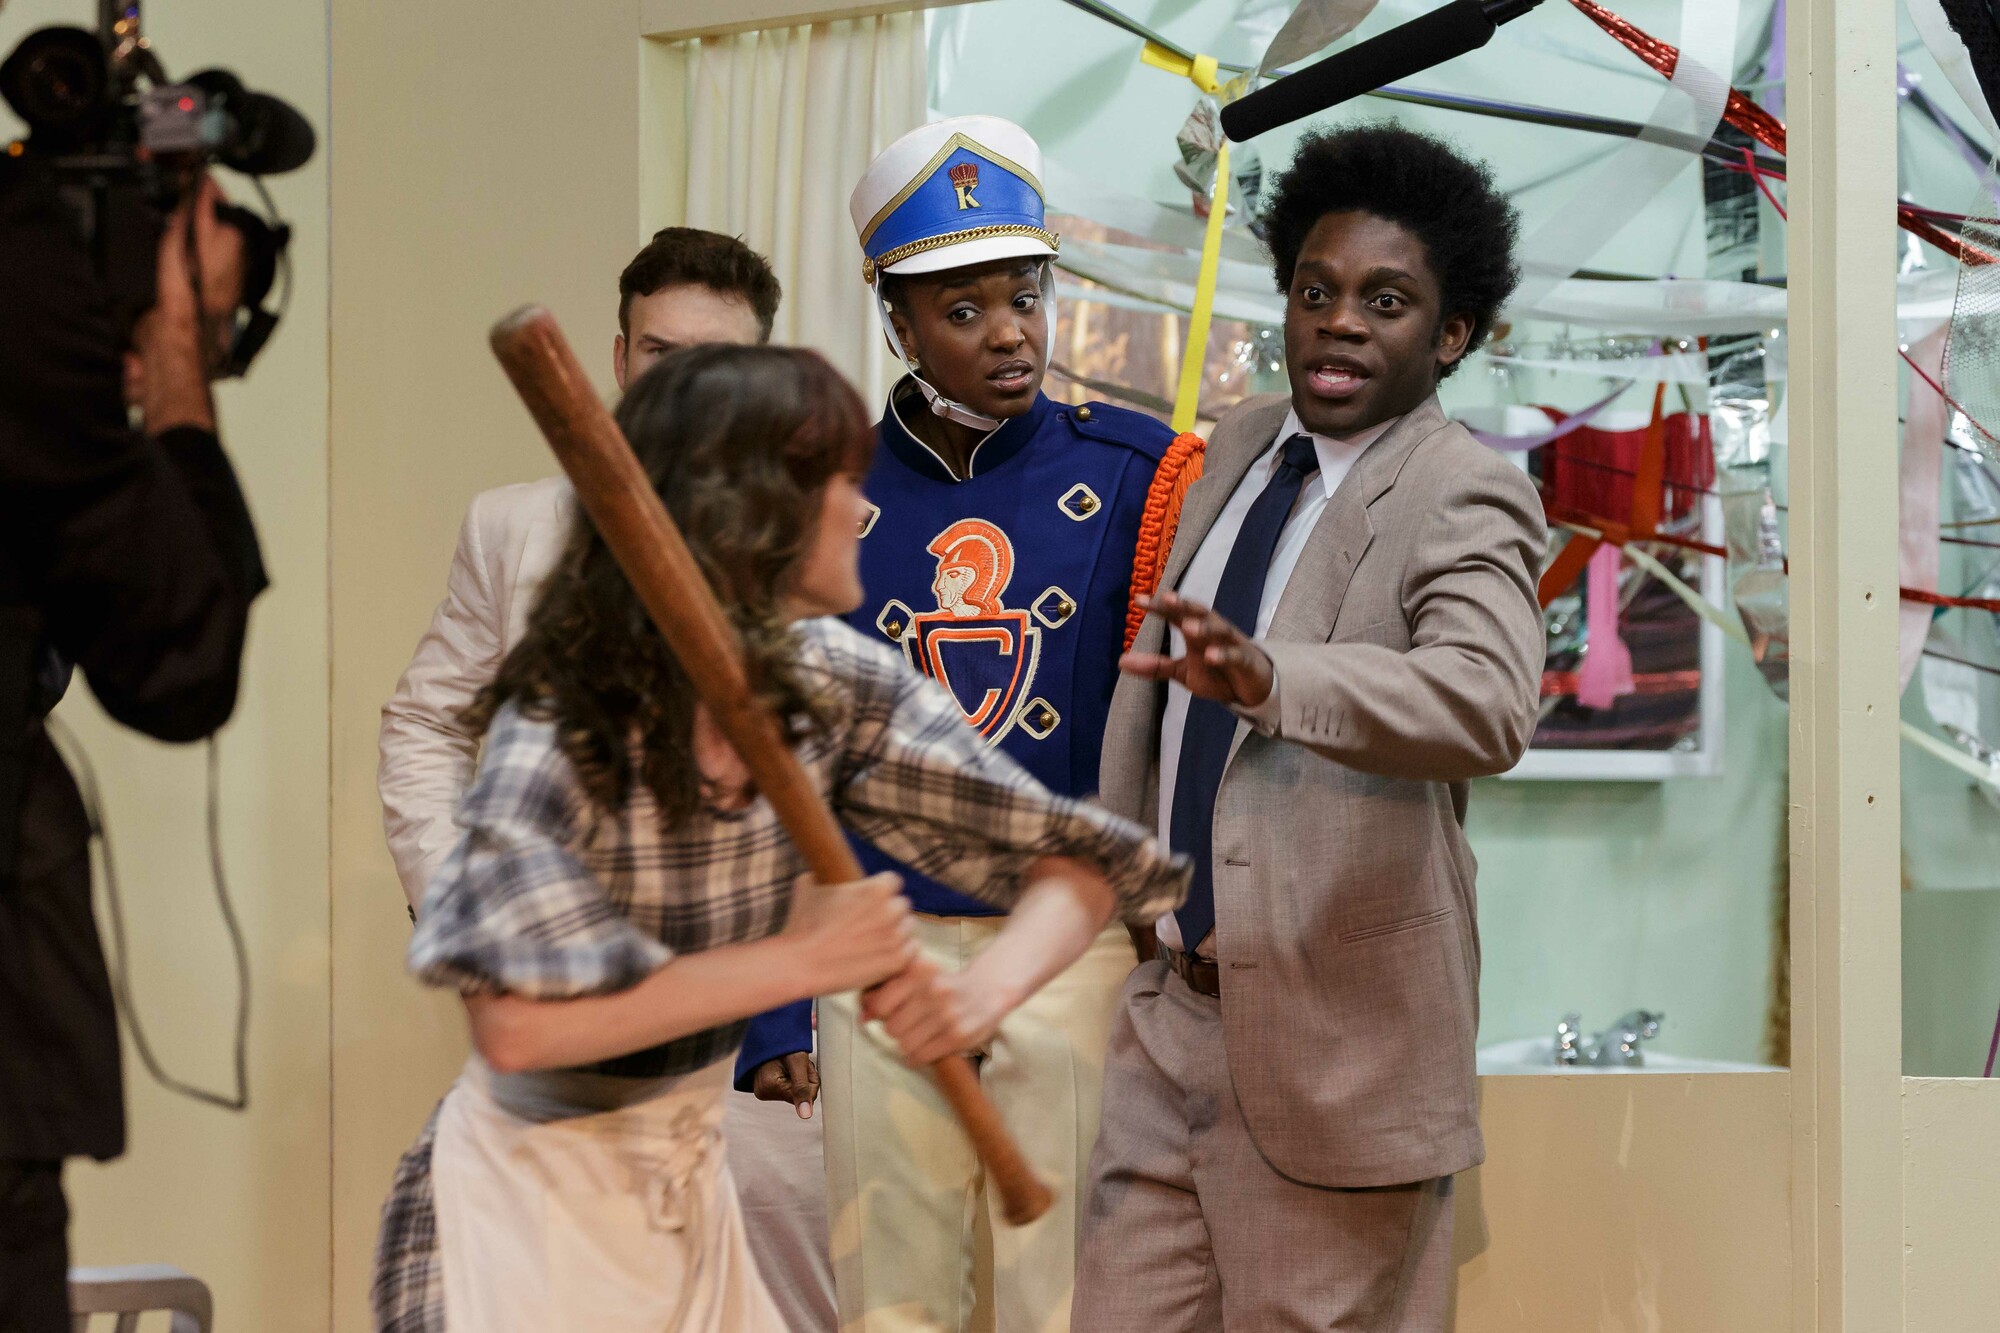 Several actors onstage. A woman swings a baseball bat at two others.